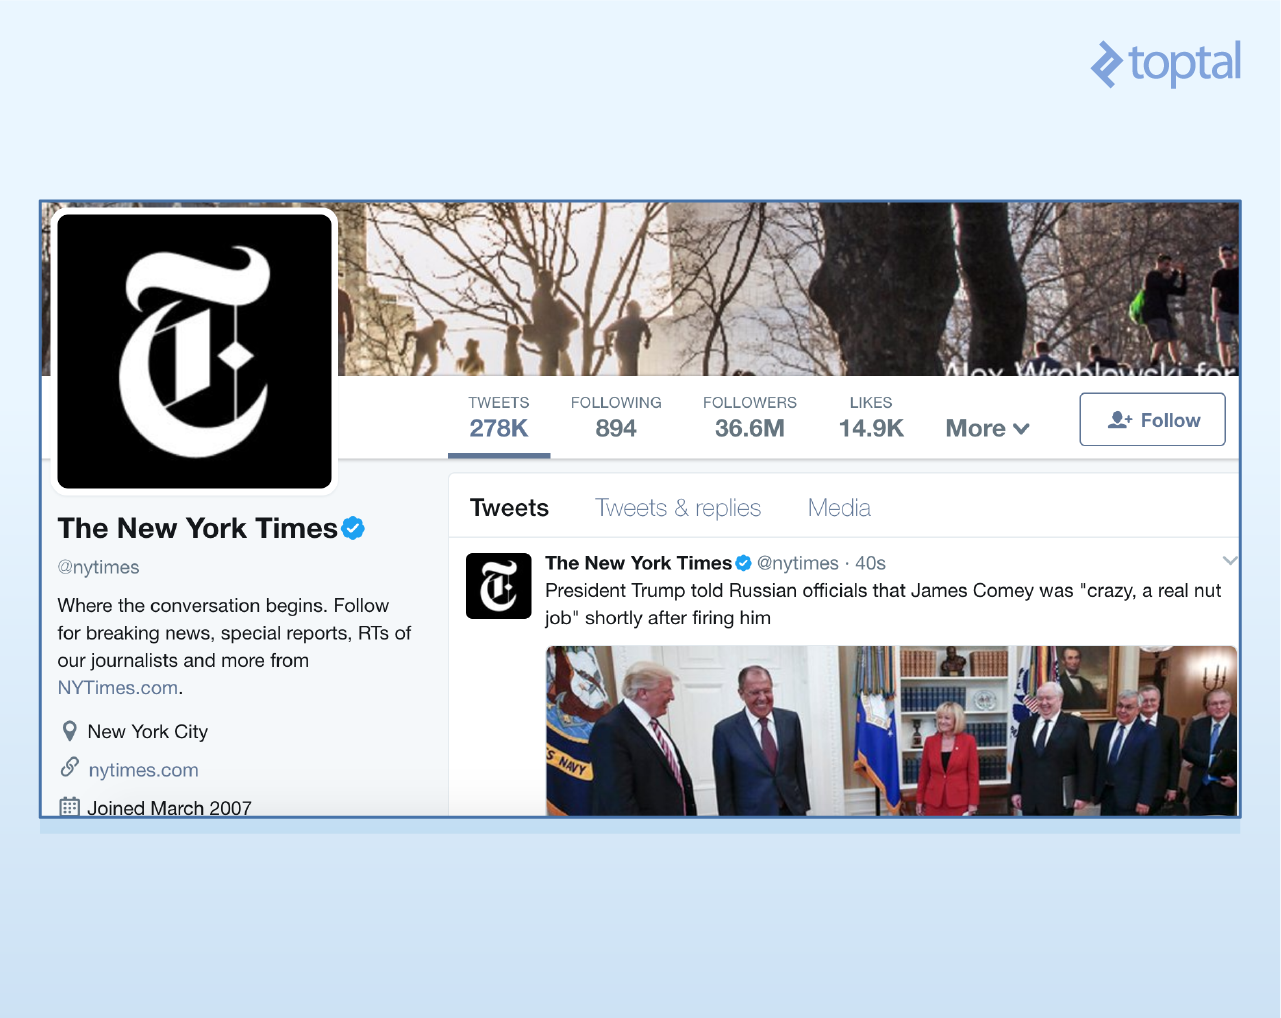 The contents of the @NyTimes Twitter account at the moment of writing